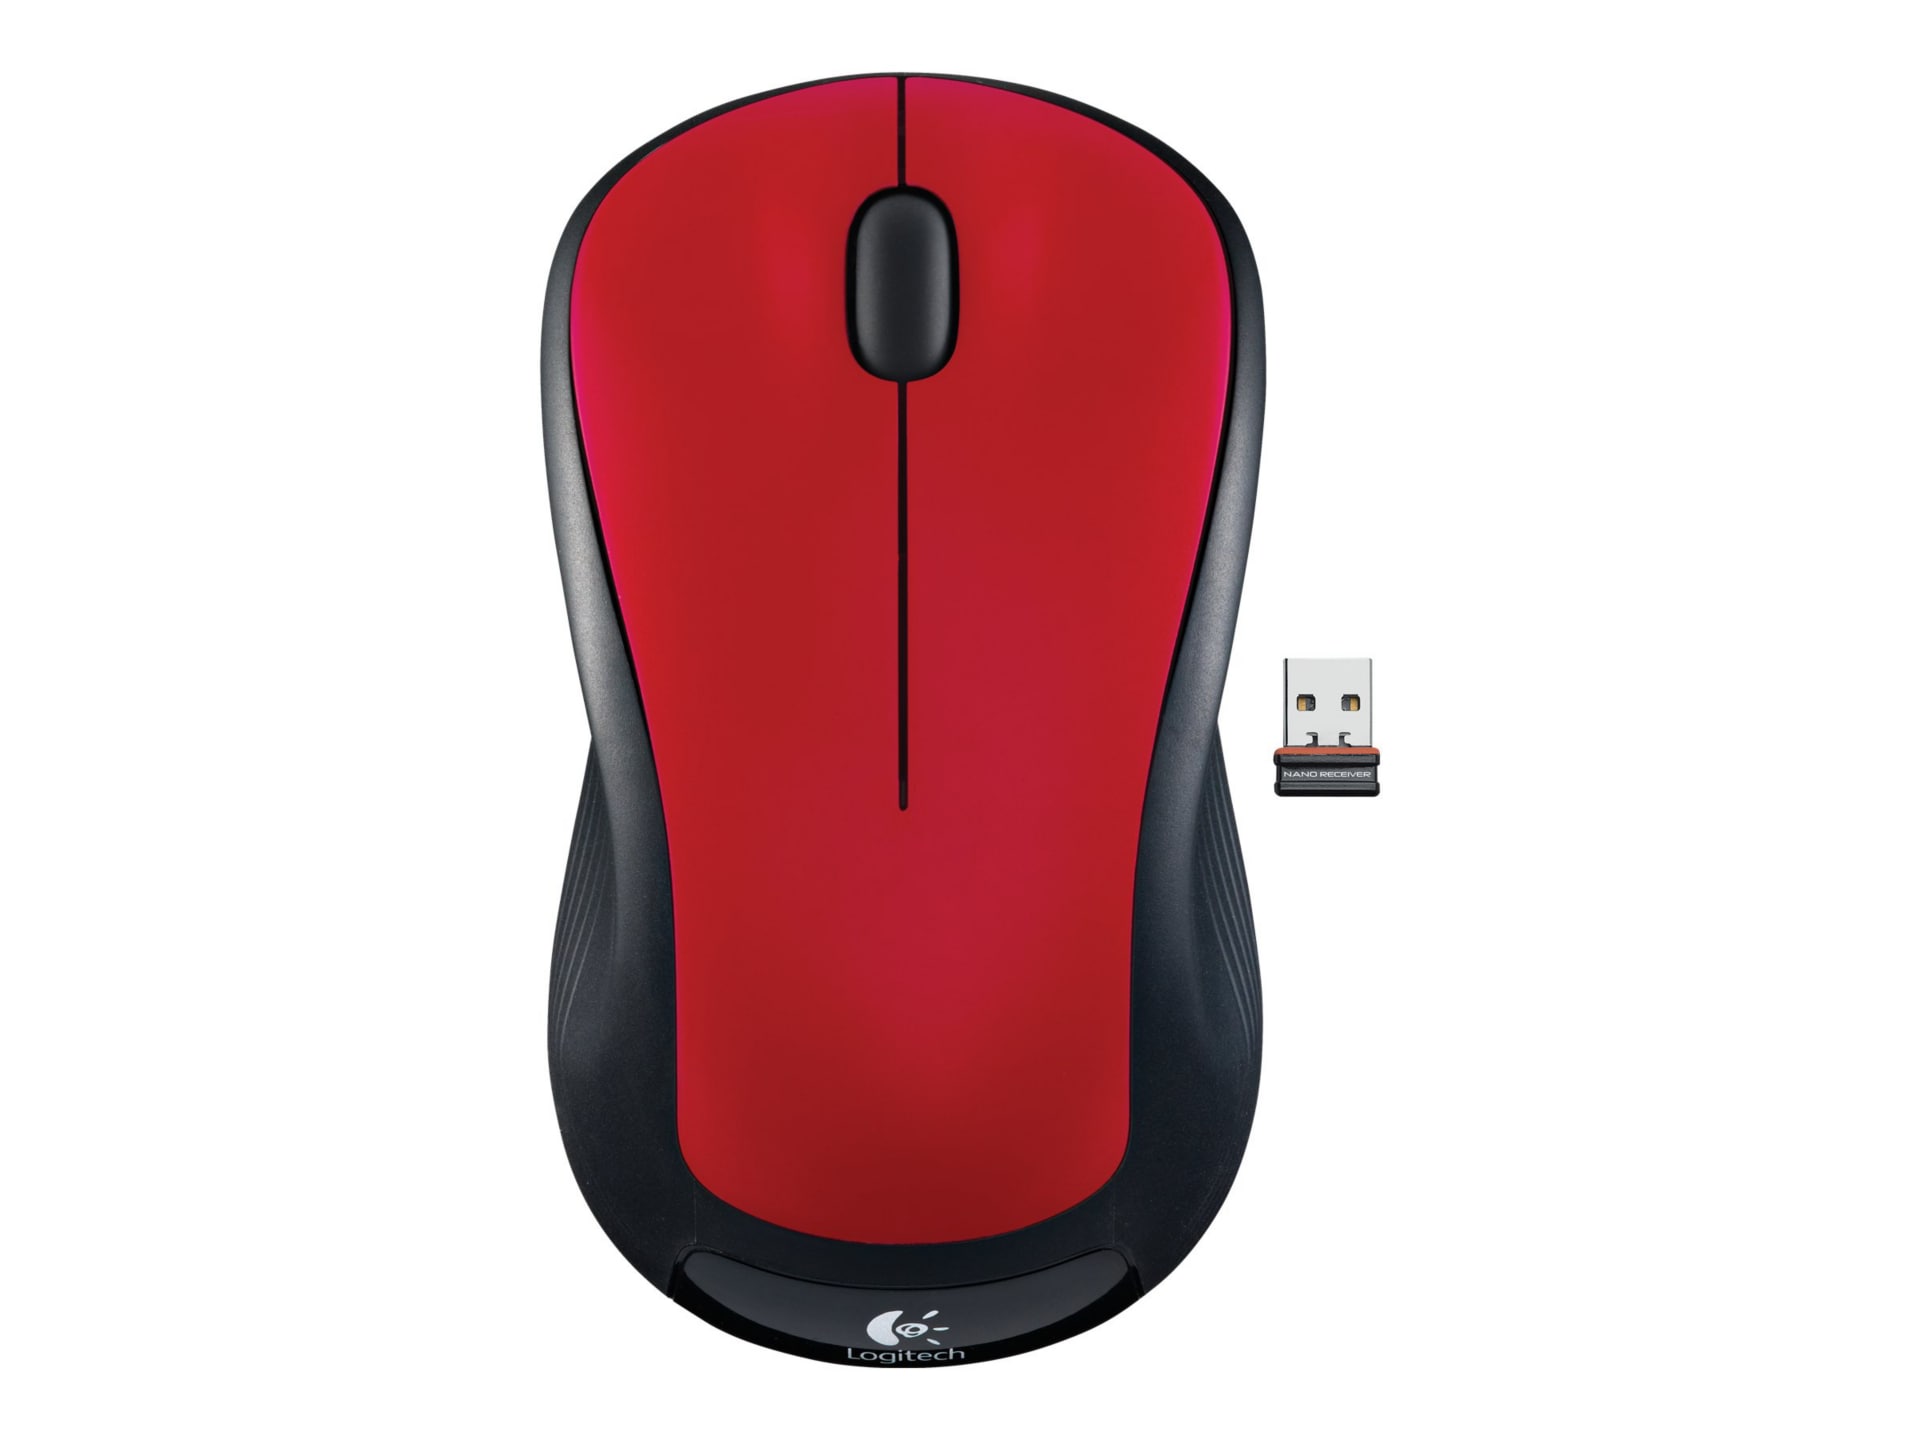 Logitech M310 - mouse 2.4 GHz flame red 910-002486 - Mice - CDW.com